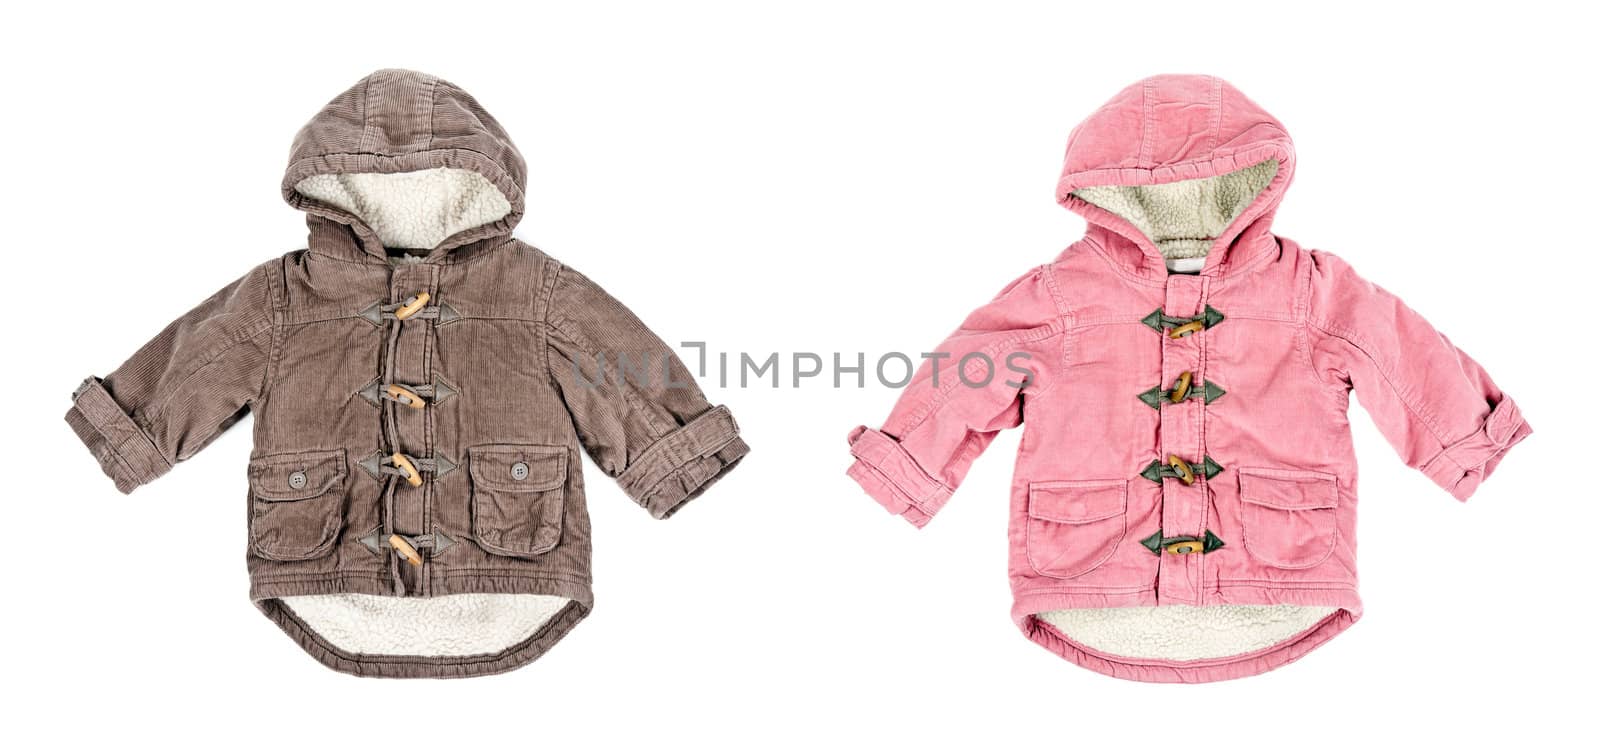 A collage made up of two corduroy jackets, warm on a white background. The image is composed of several photographs.